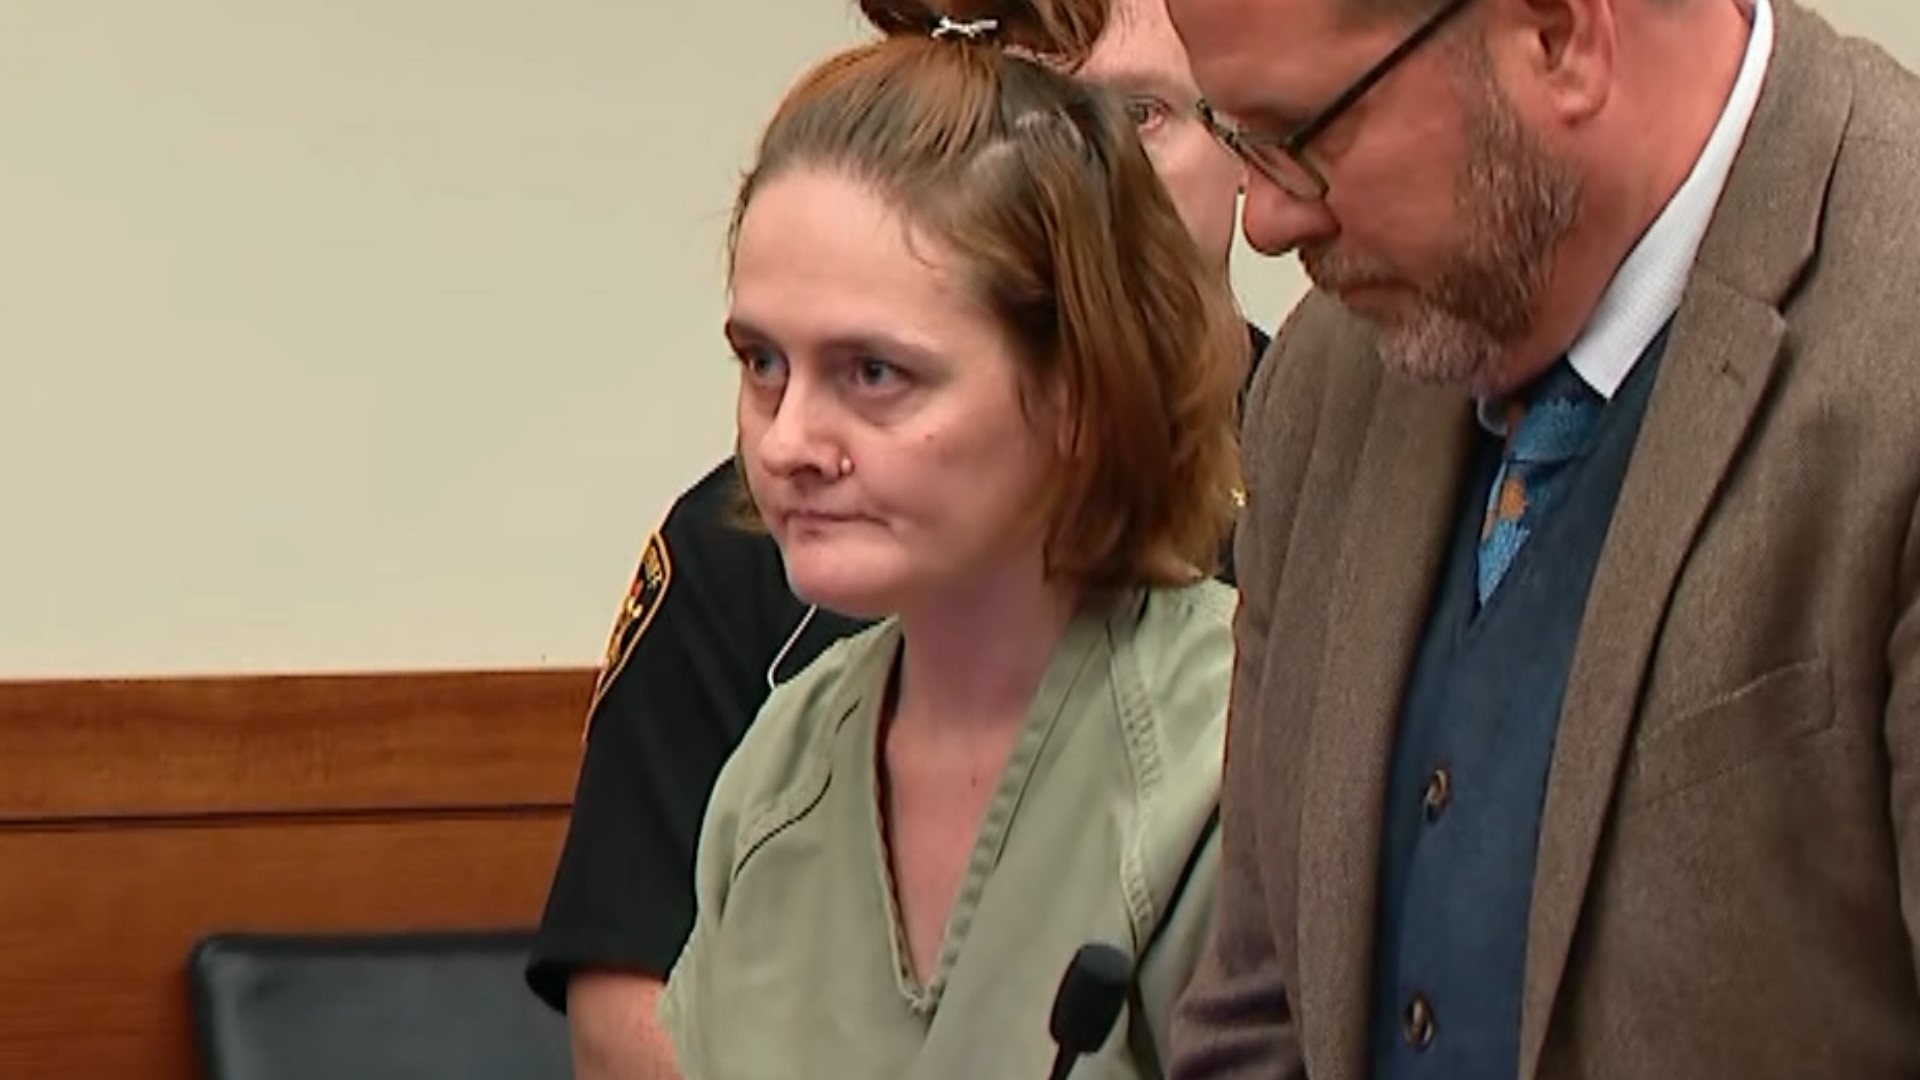 A woman indicted on several murder charges after she allegedly met men for sex and drugged them so she could rob them made her first appearance in court